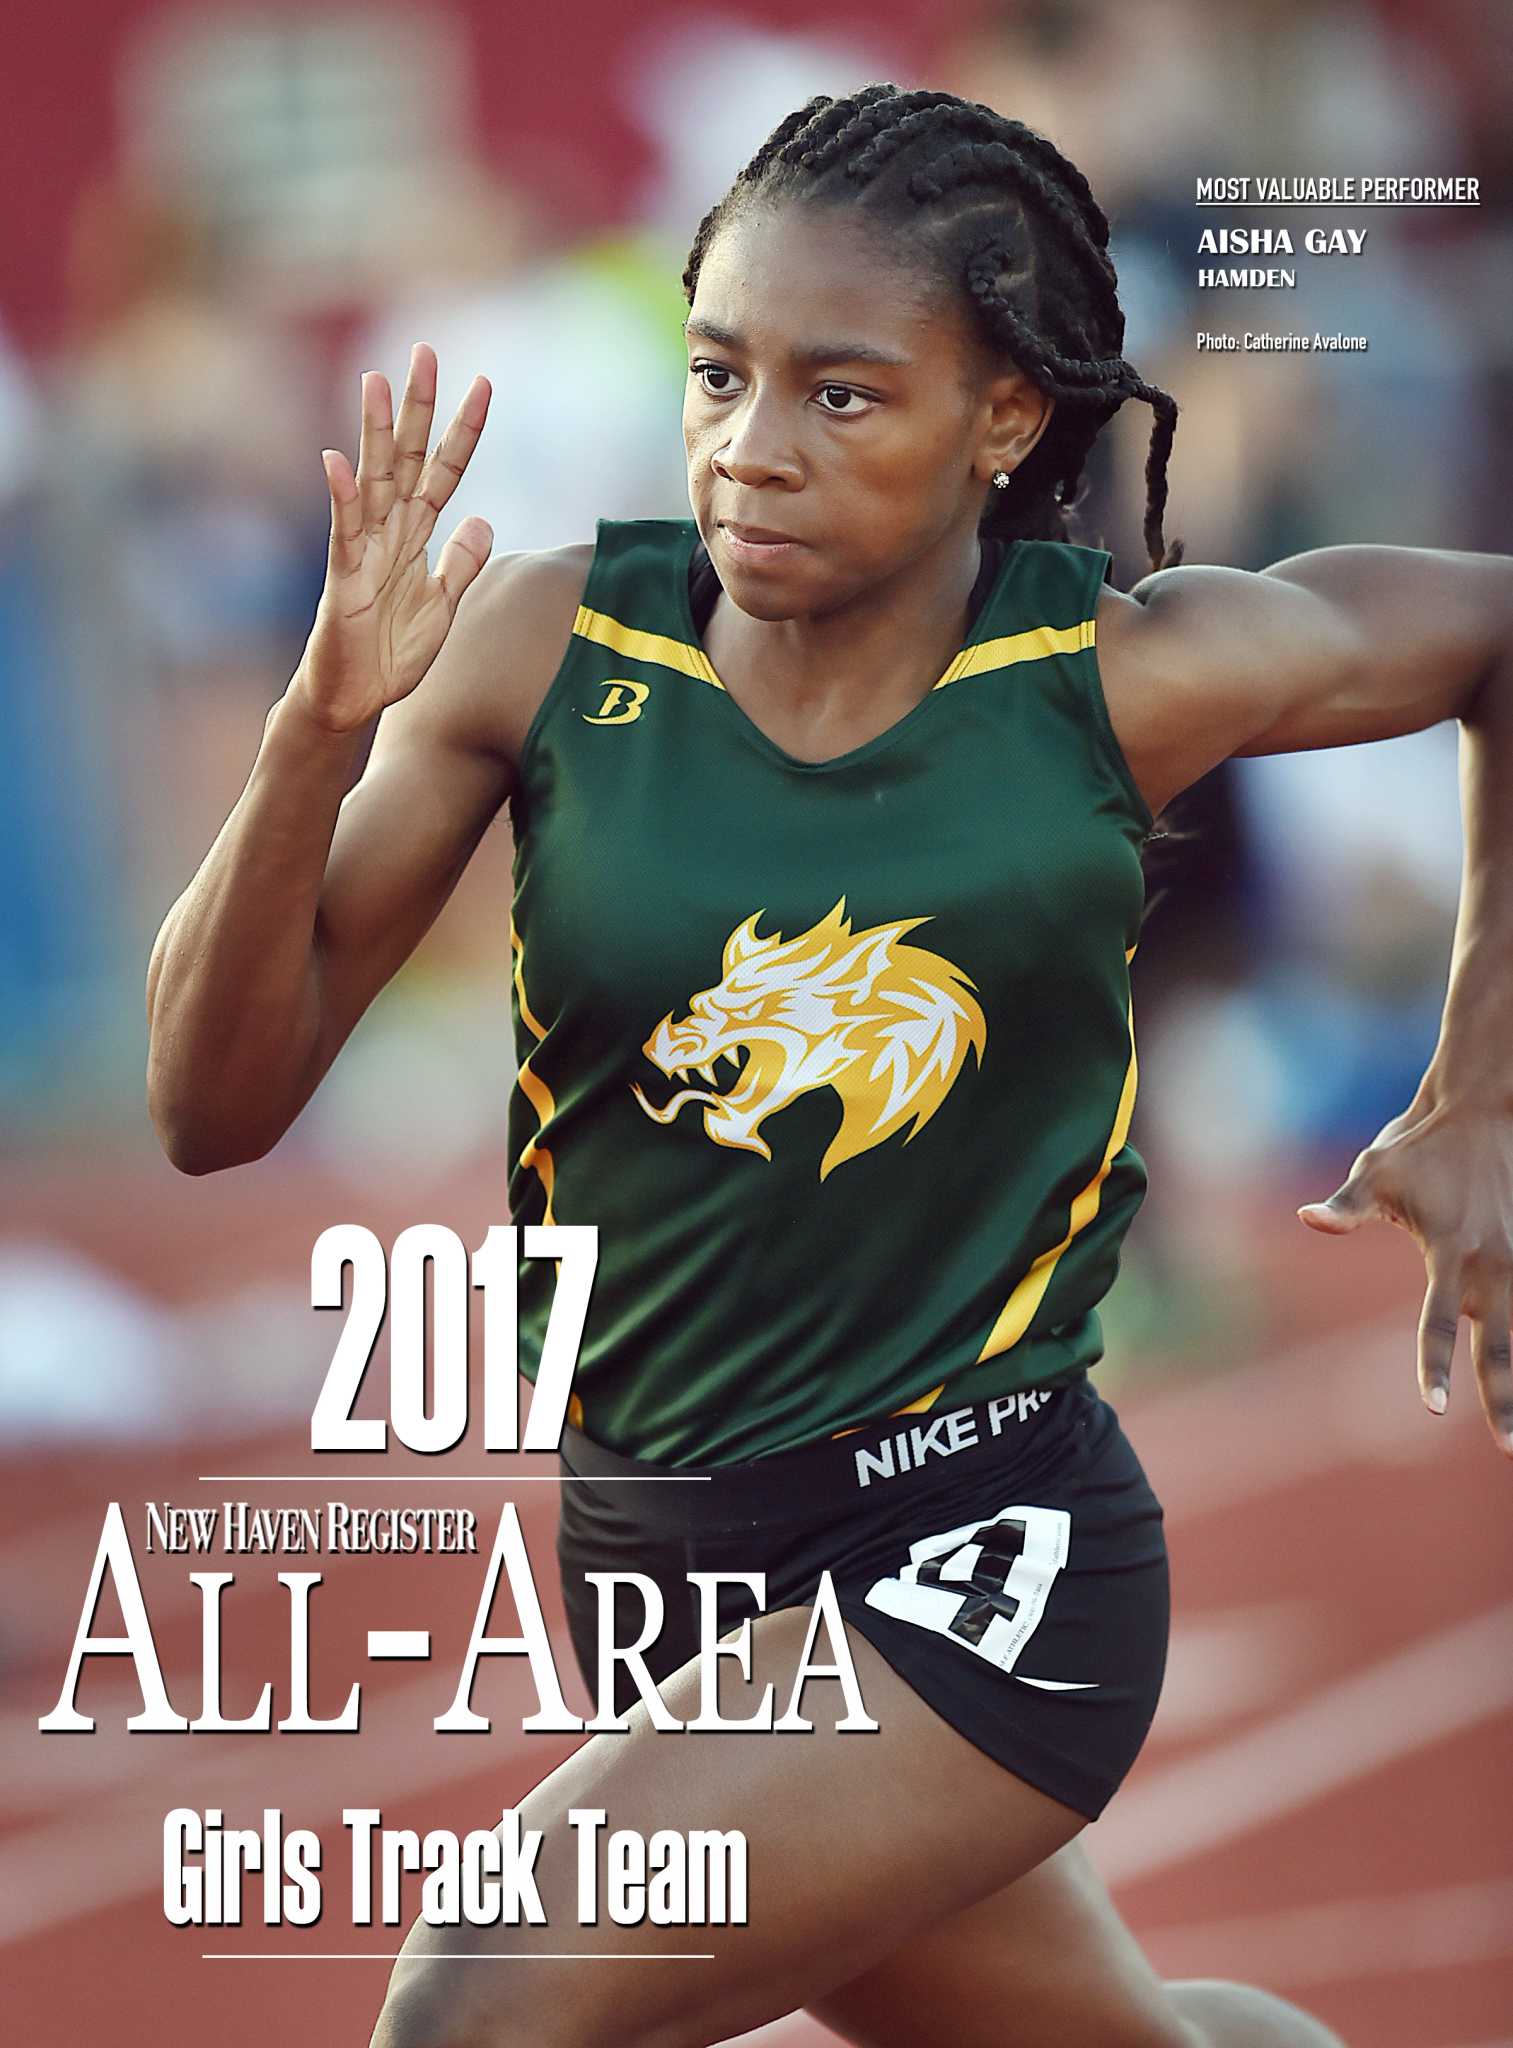 The 2017 New Haven Register All-Area Girls Outdoor Track and Field